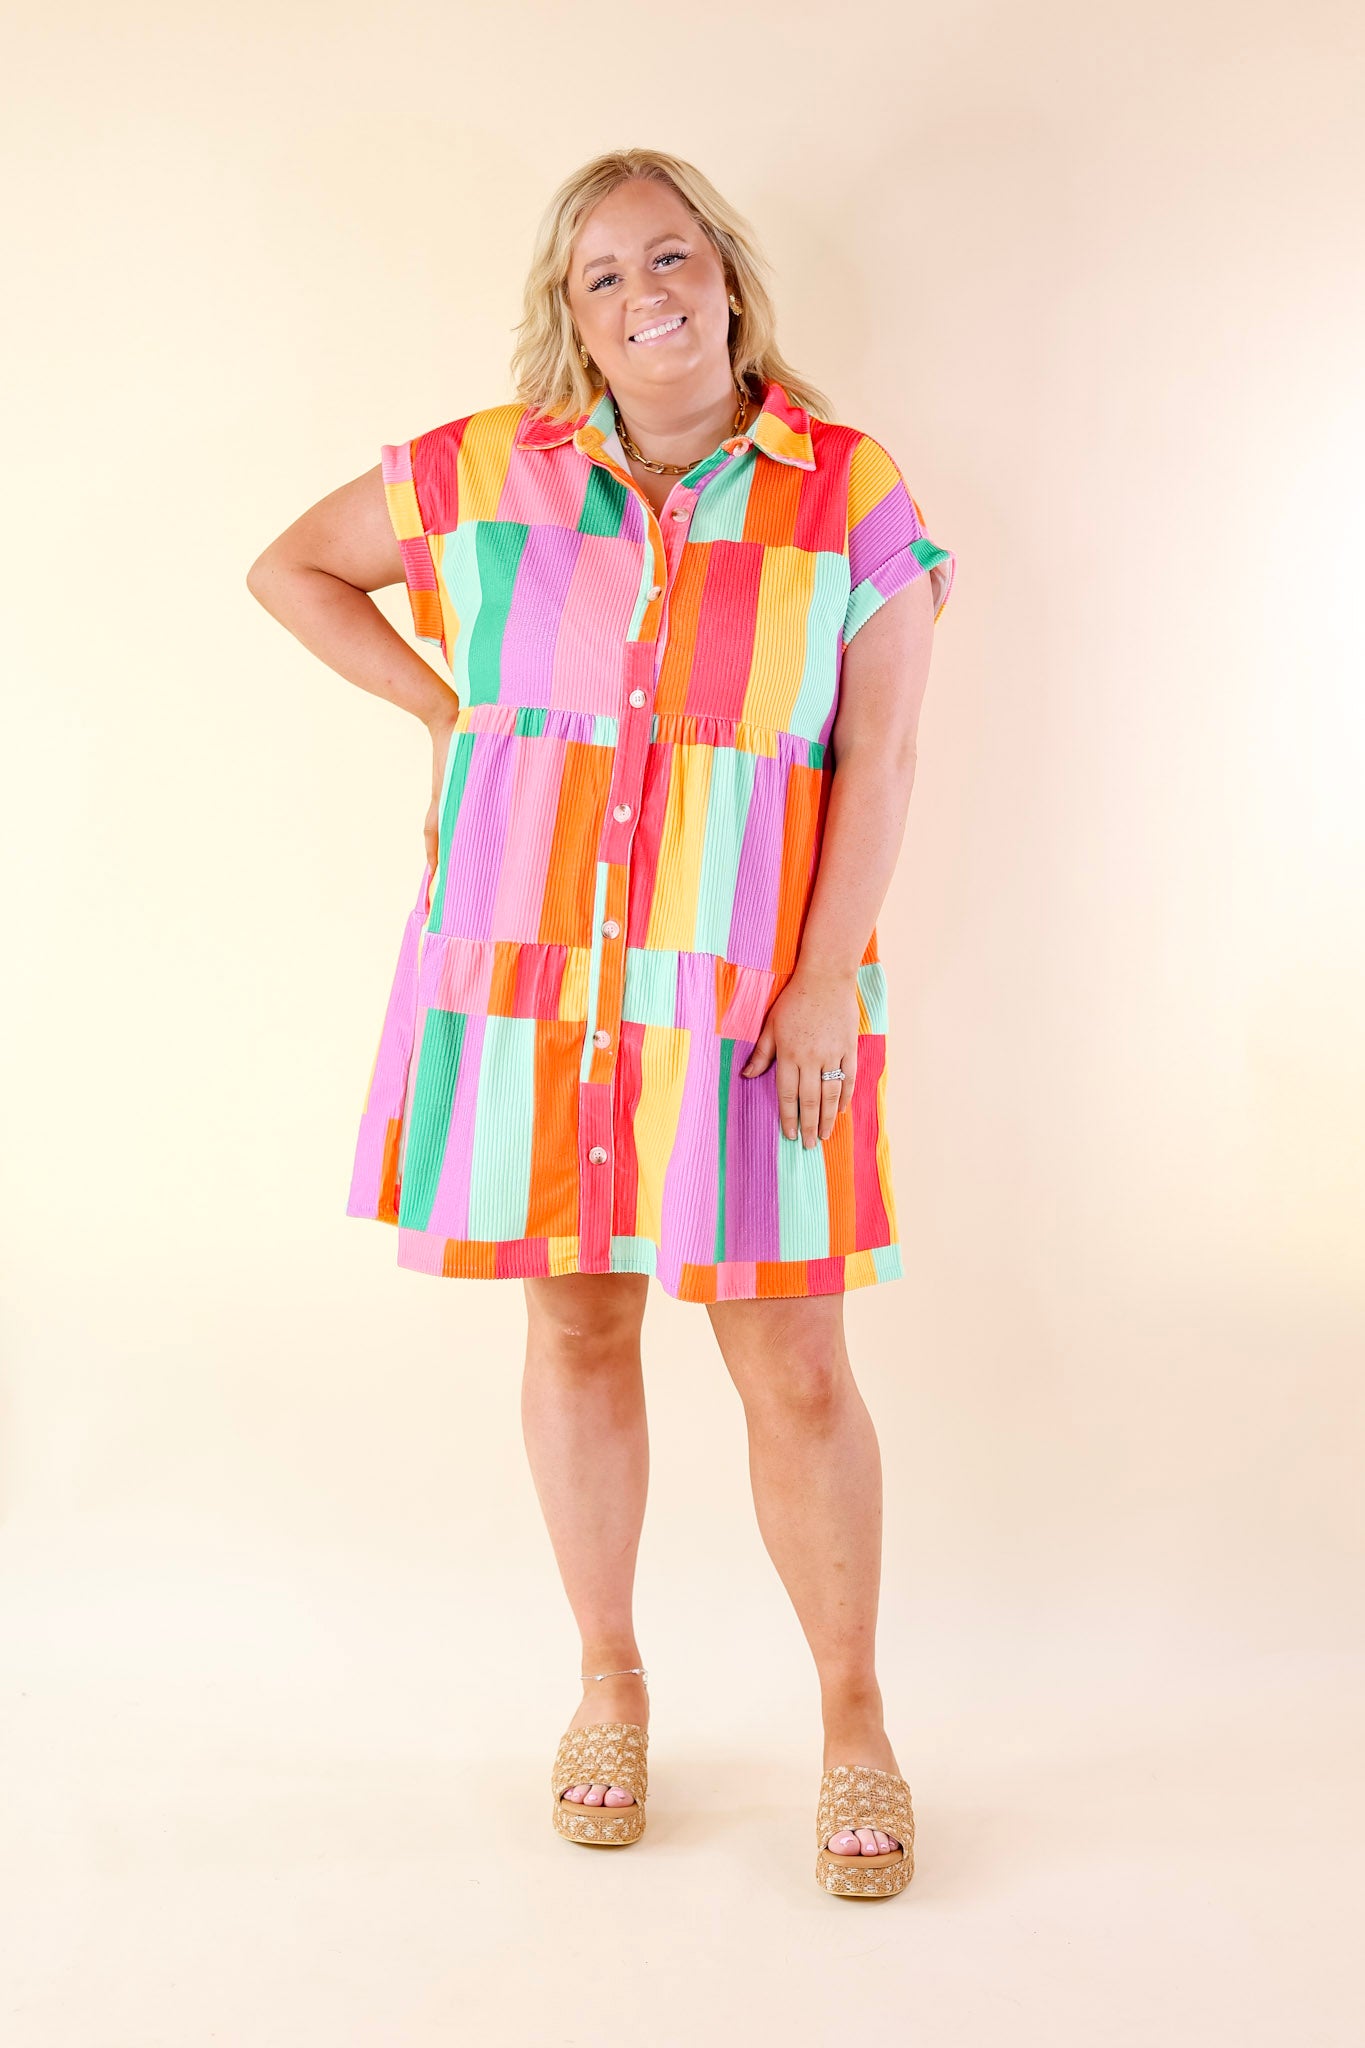 Appreciate You Color Block Corduroy Button Up Dress in Multi - Giddy Up Glamour Boutique